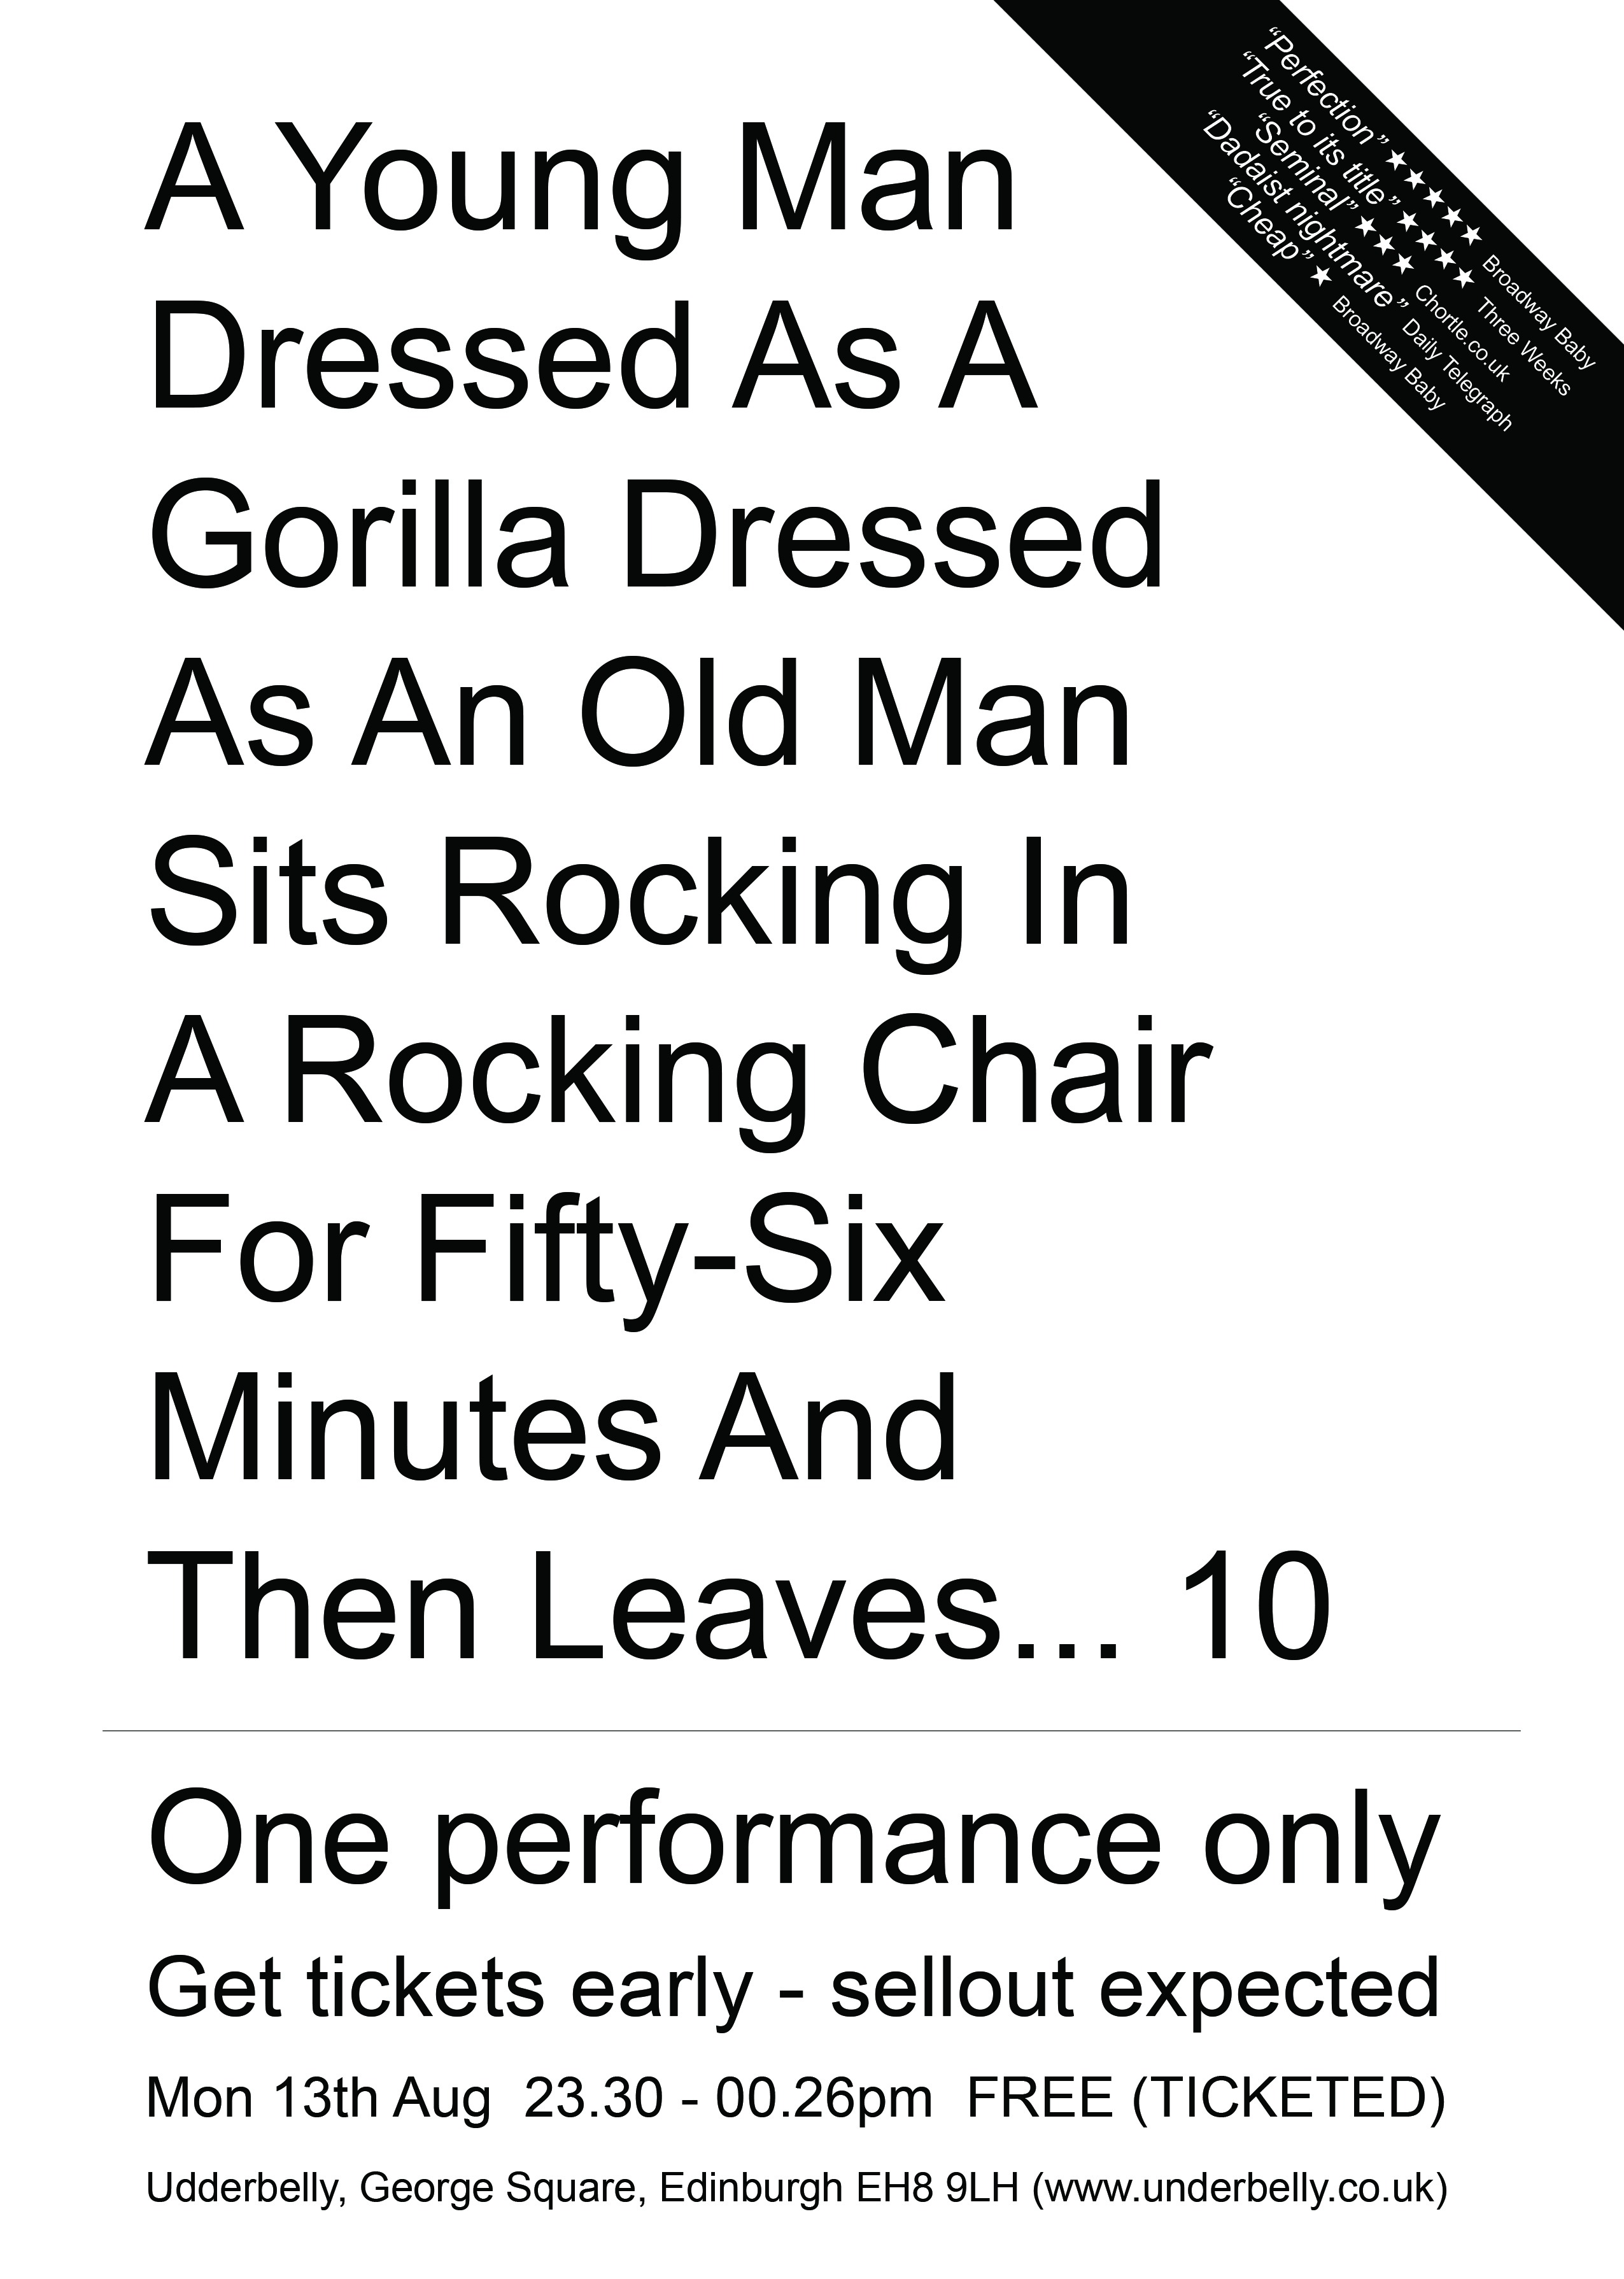 The poster for A Young Man Dressed As A Gorilla Dressed As An Old Man Sits Rocking In A Rocking Chair For Fifty-six Minutes And Then Leaves...10